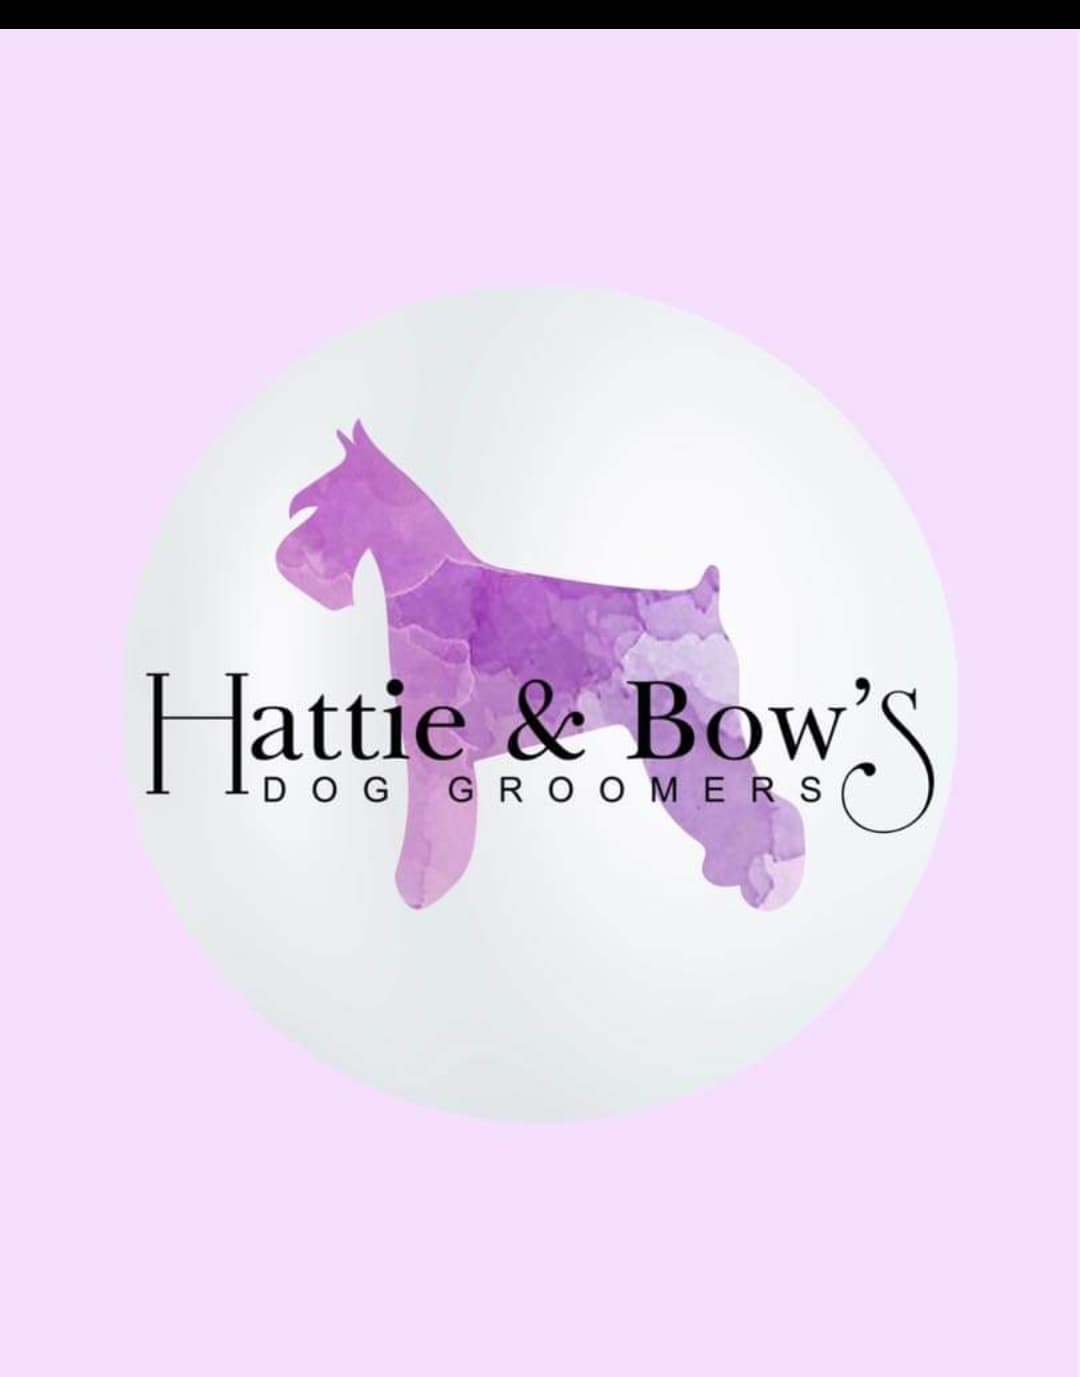 Hattie&Bow's Dog Groomers has arrived in Horwich